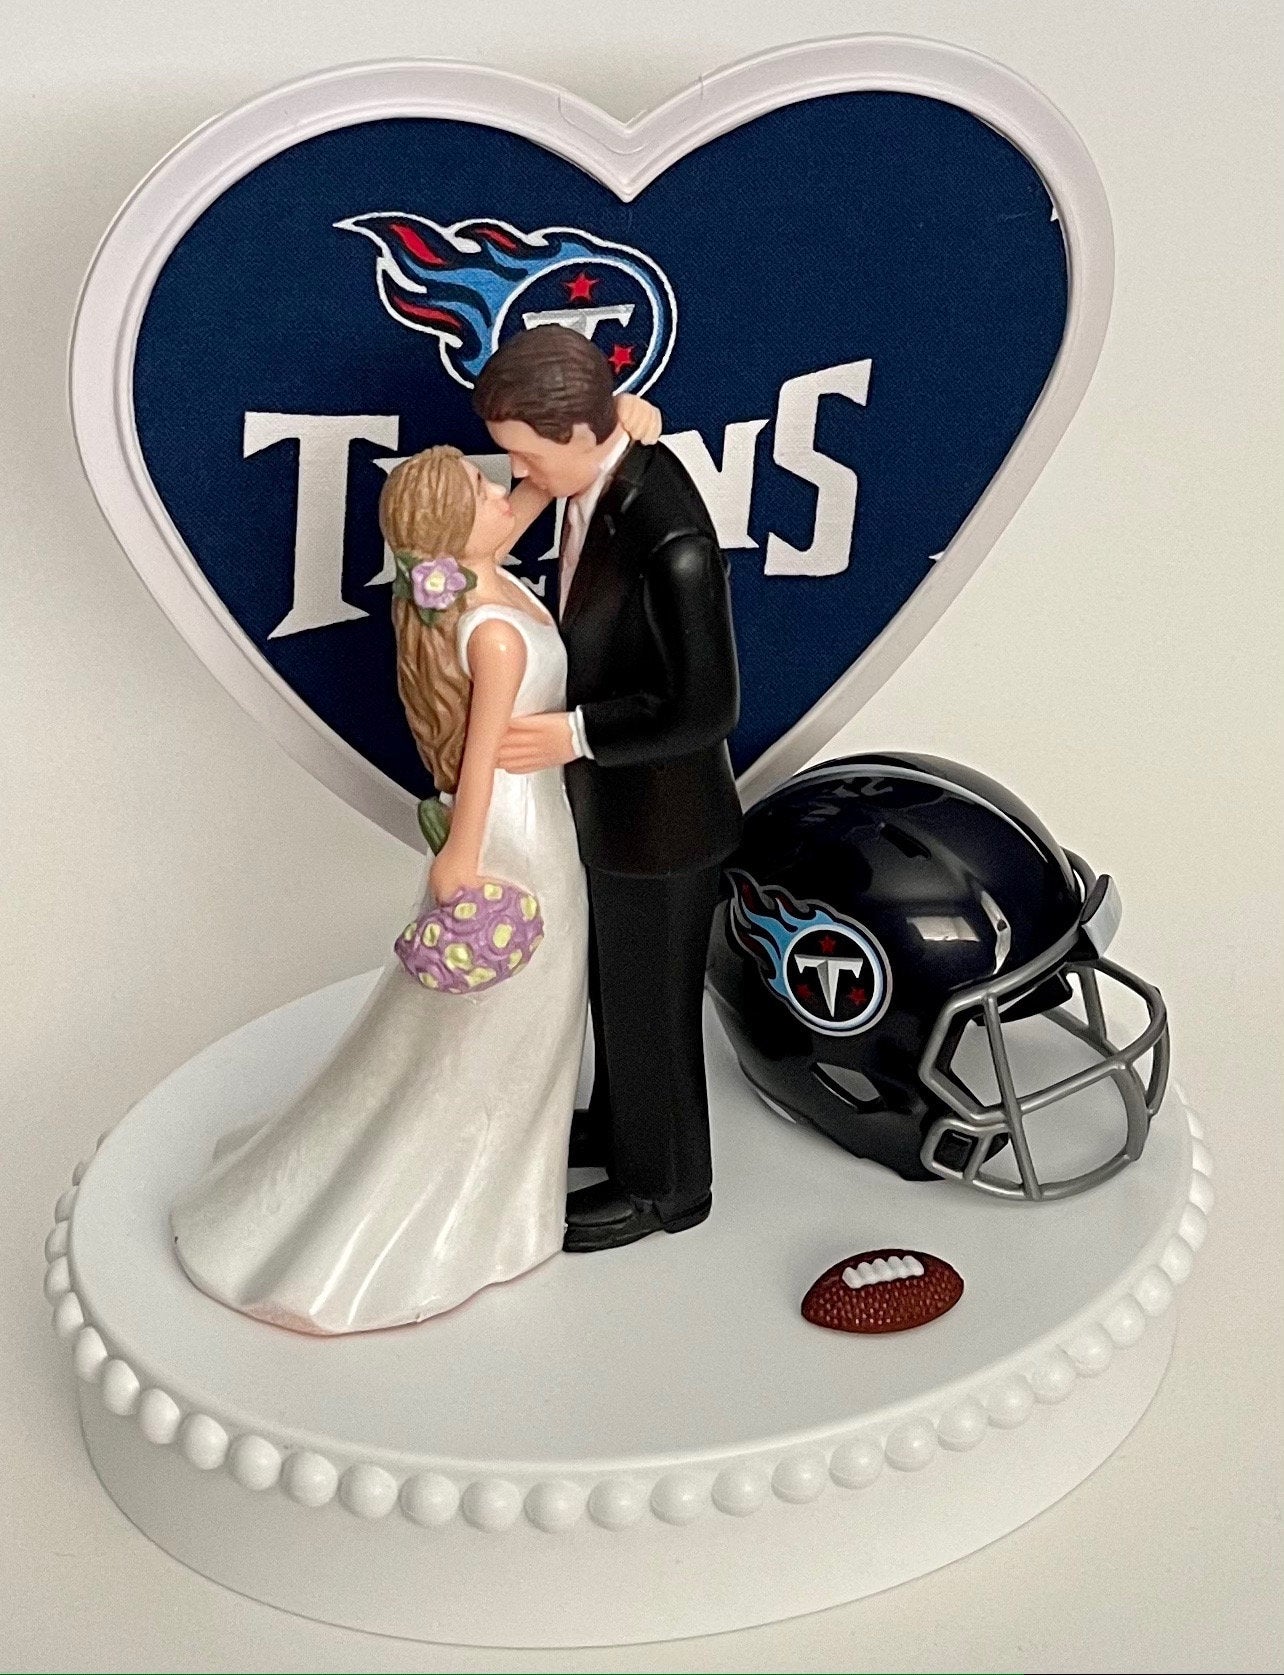 Wedding Cake Topper Tennessee Titans Football Themed Beautiful Long-Haired Bride Groom Fun OOAK Sports Fan Fun Bridal Shower Reception Gift